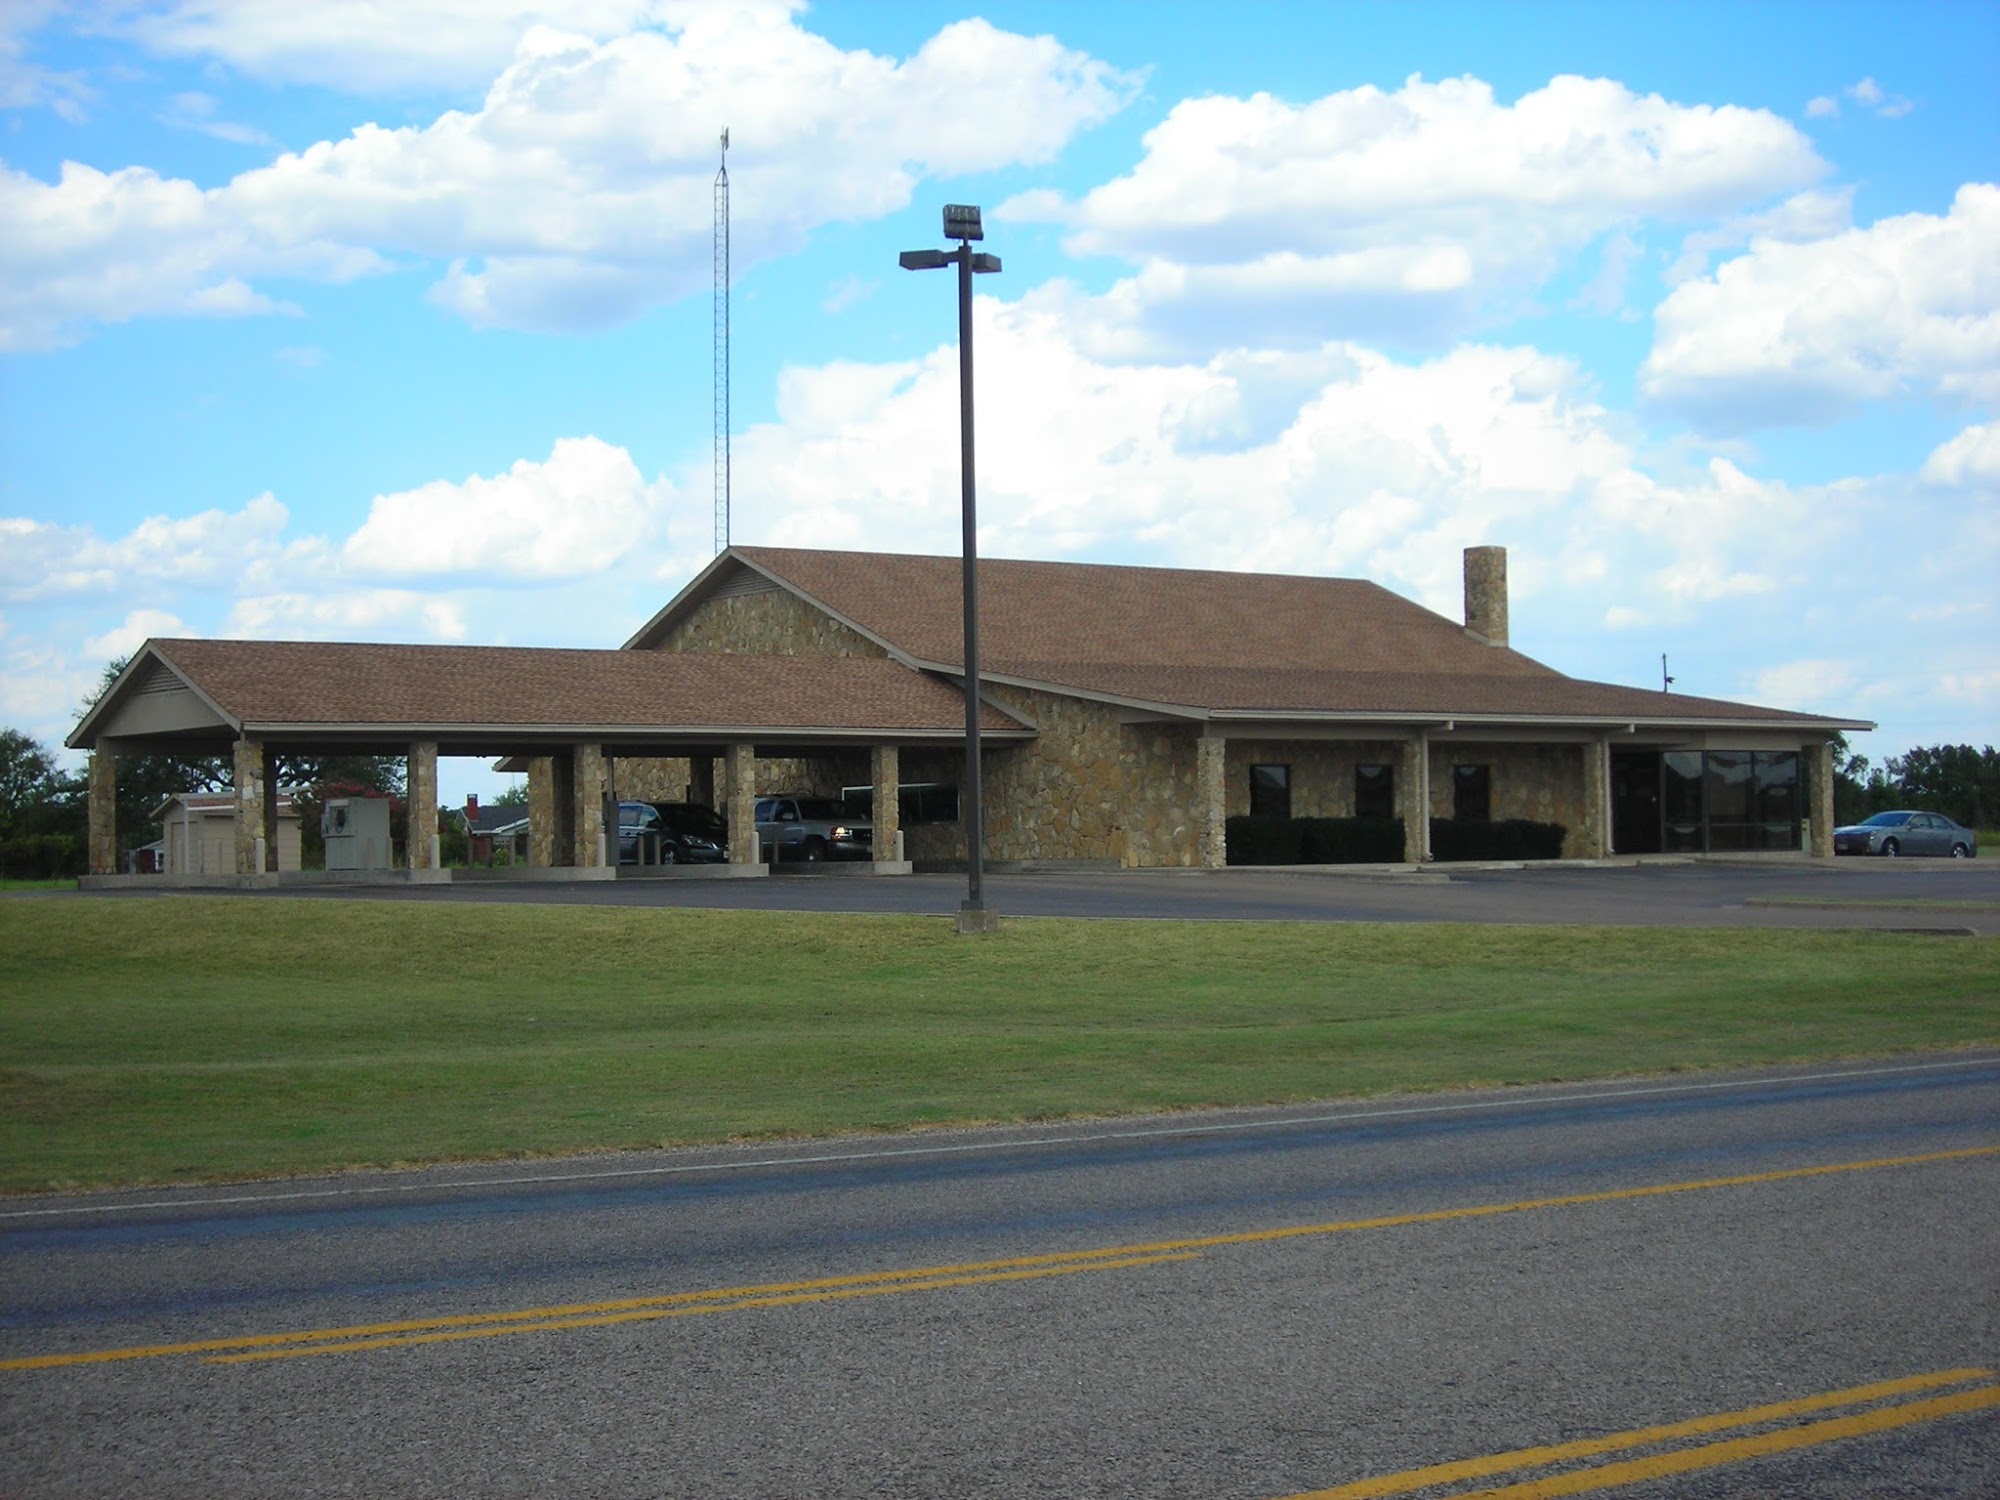 First National Bank of Bosque County